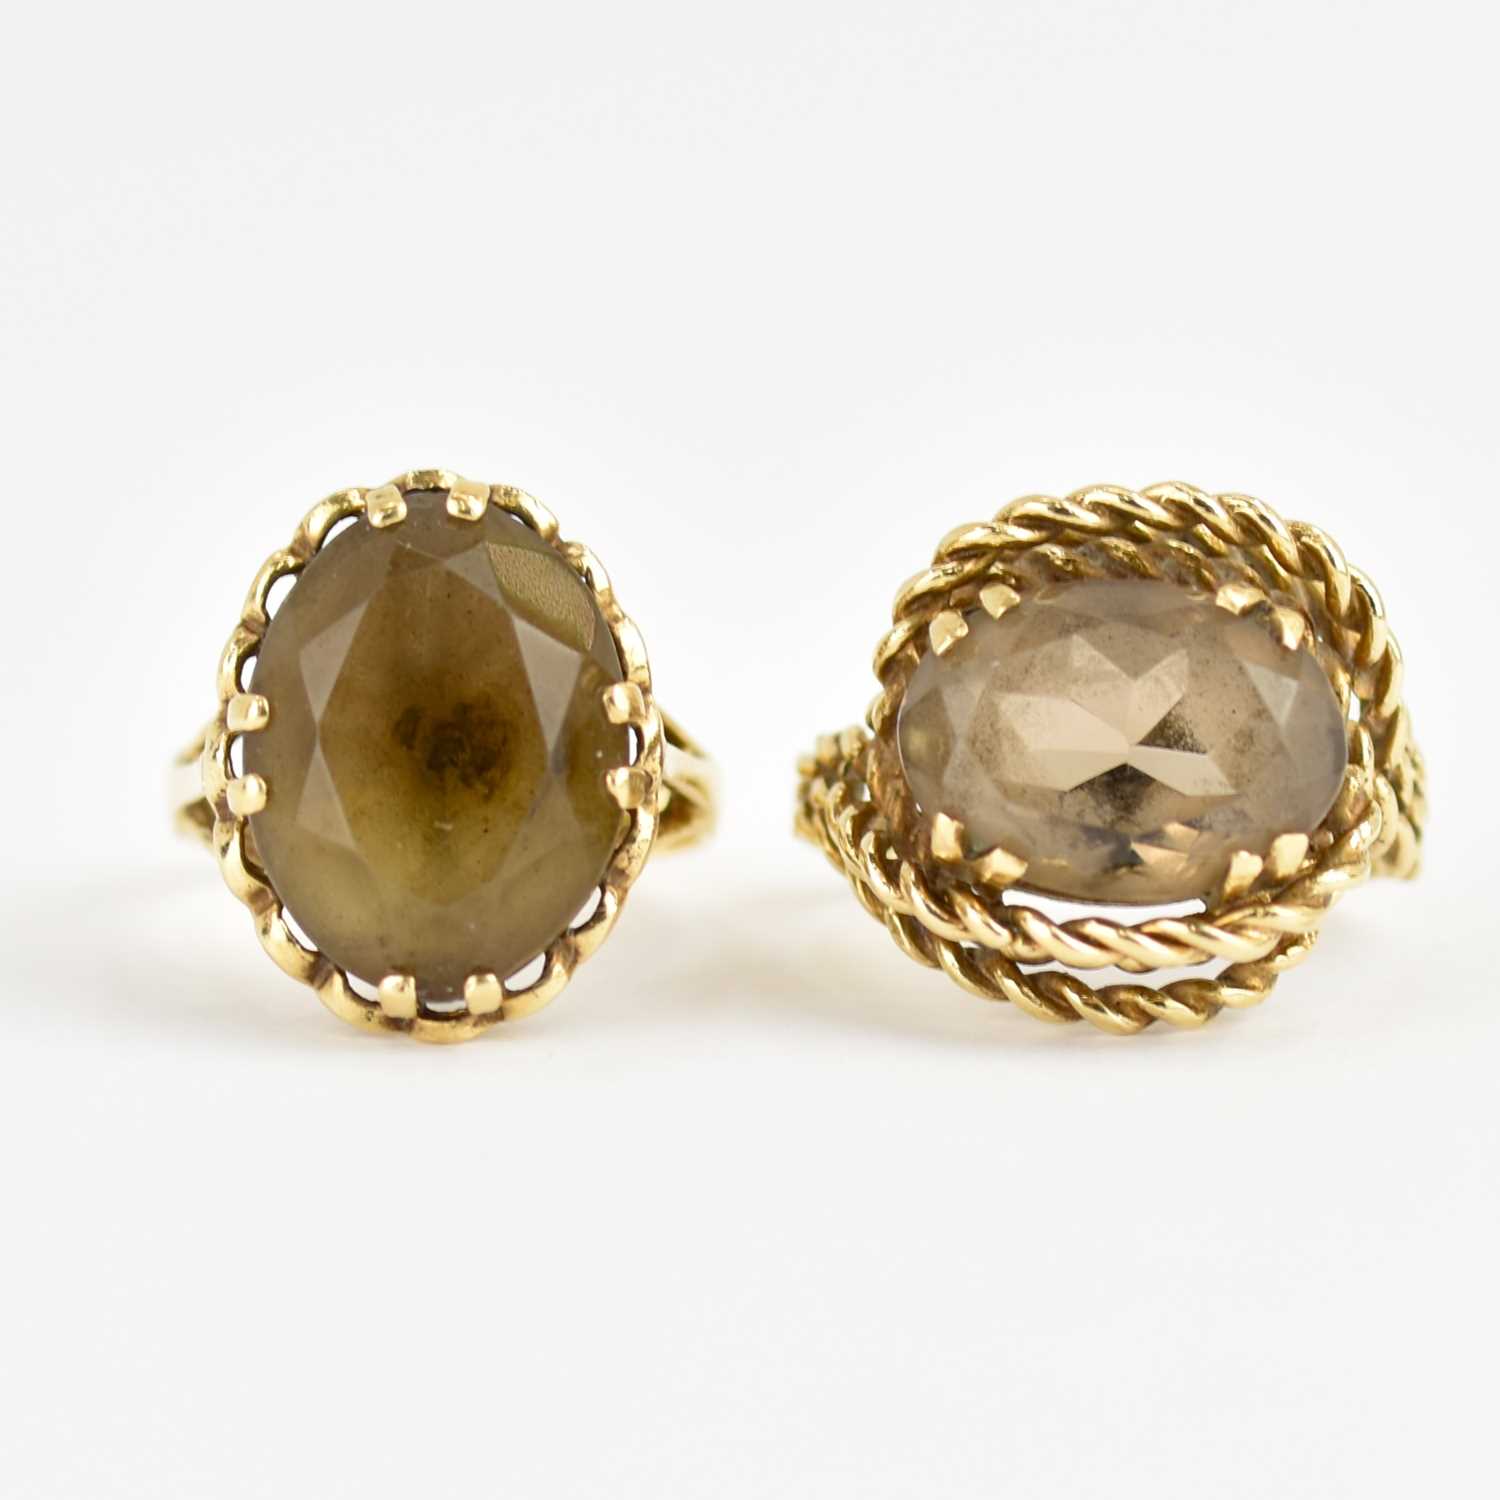 Two 9ct gold dress rings, both claw set with oval smoky quartz, one with rope twist mount, Size K - Image 2 of 3